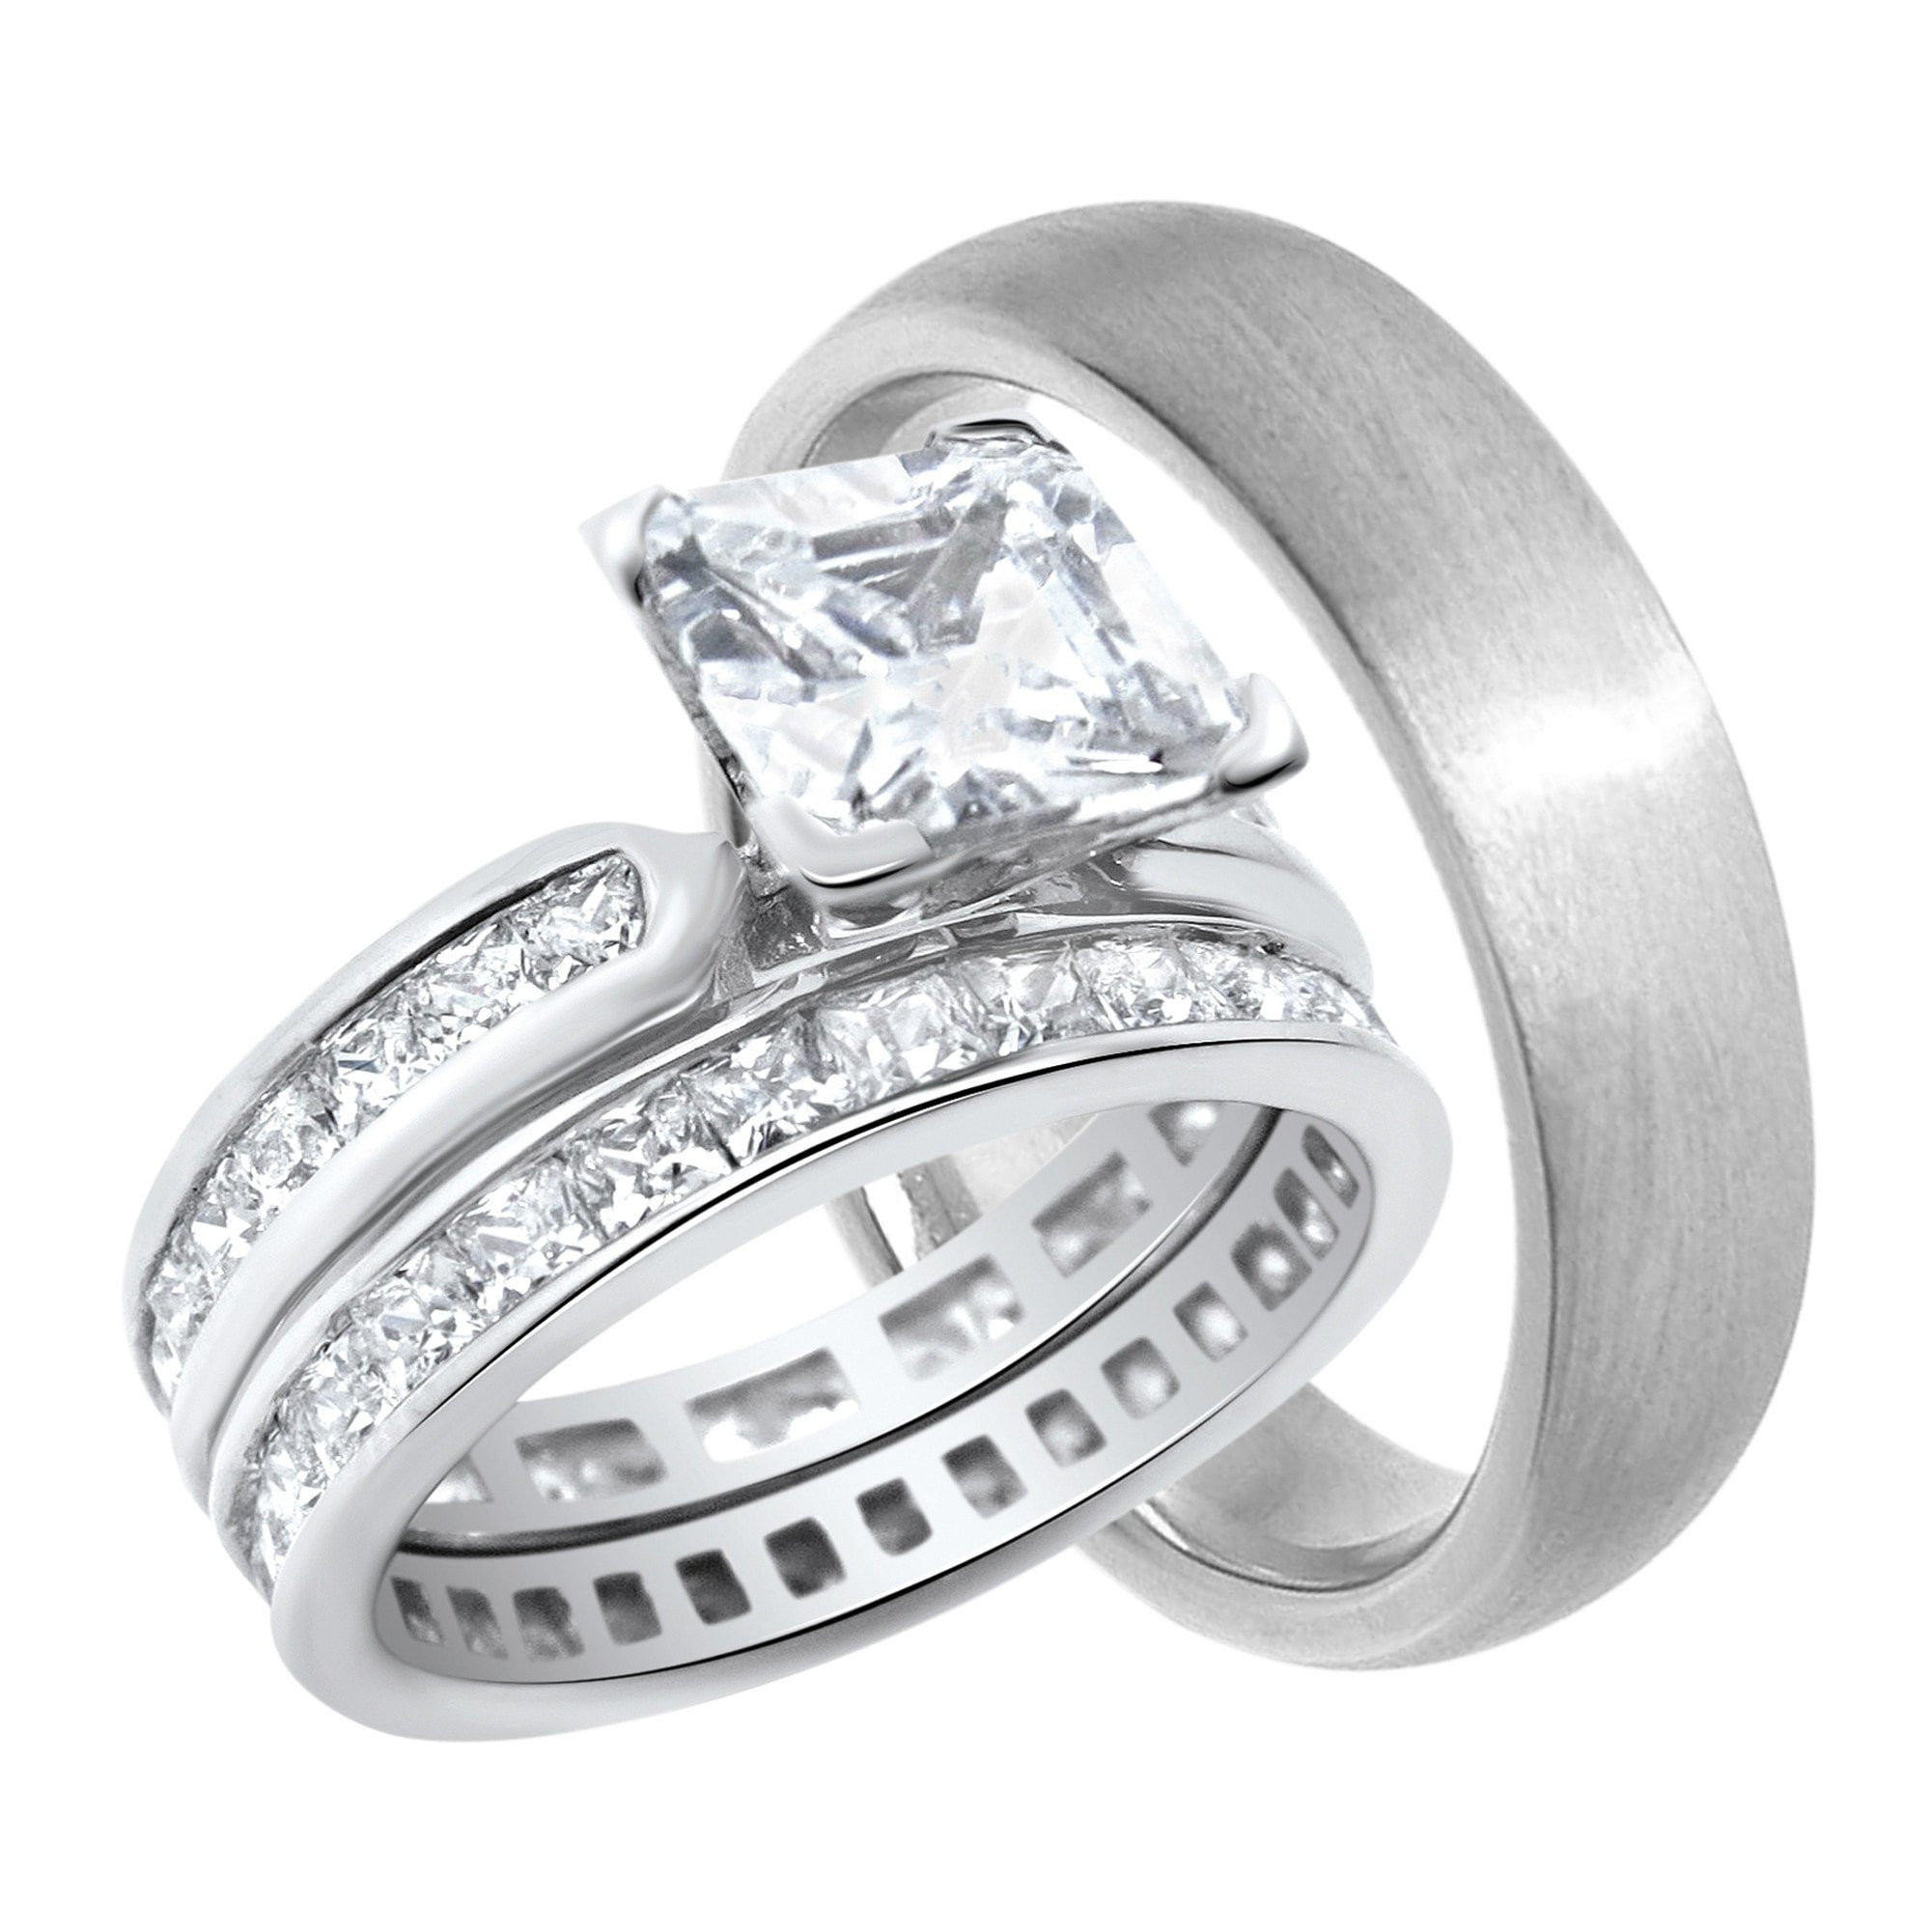 Walmart His And Hers Wedding Rings
 His Hers Wedding Rings Set Cheap Matching Rings for Him